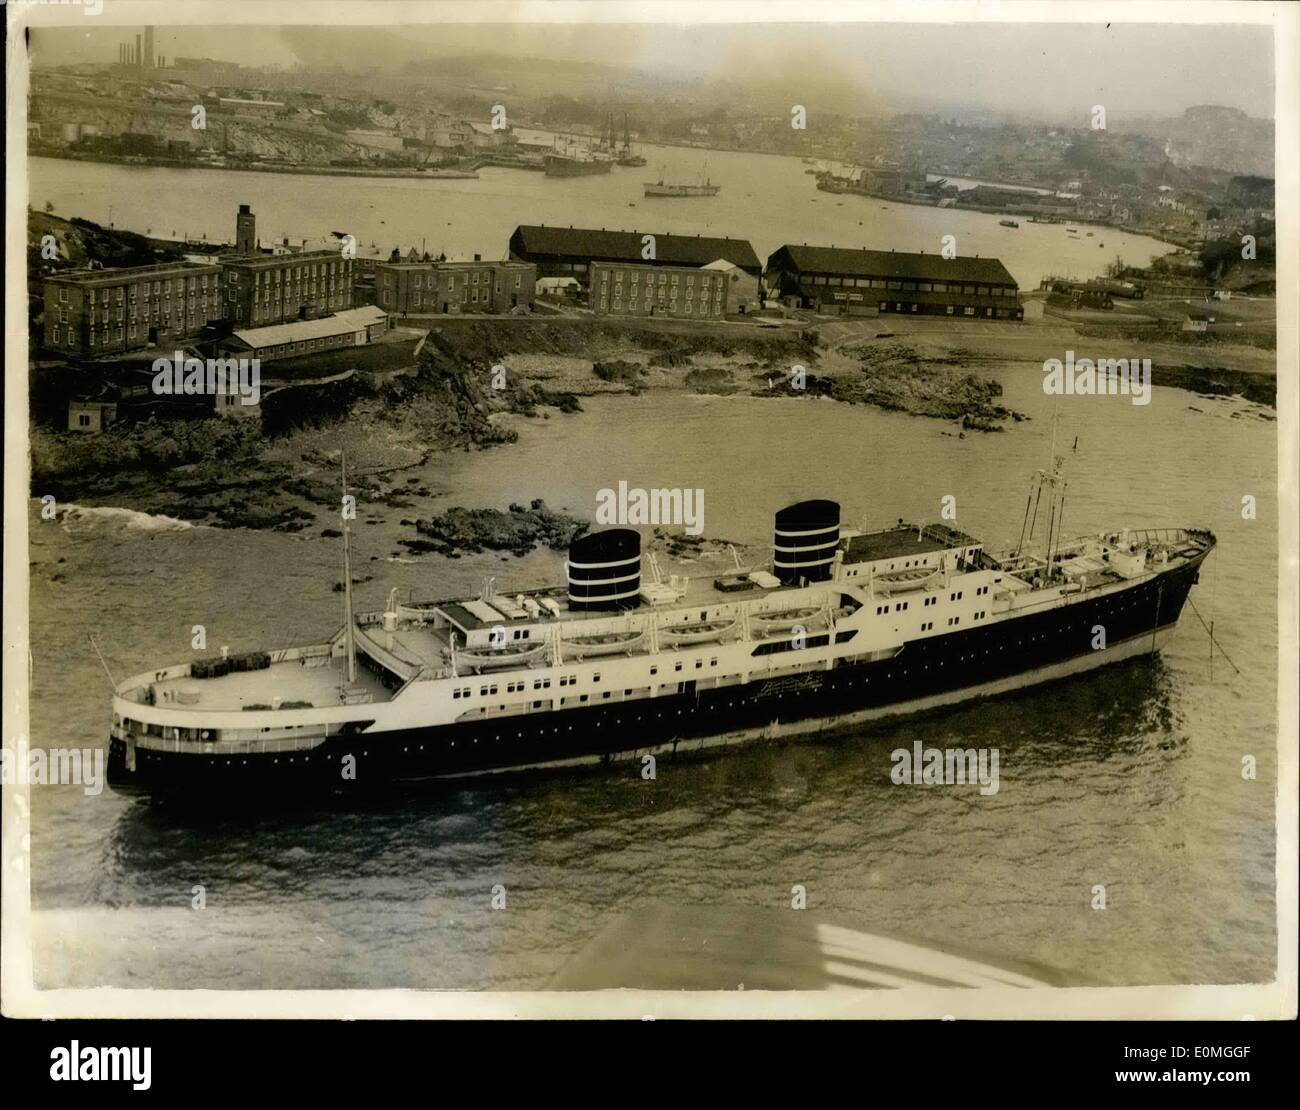 May 05, 1955 - Norwegian Liner Aground Off Plymouth Hoe.. As Seen From The Air.. Never before has a liner come so close to Plymouth Hoe.. So close, in fact, that the 6,269 ton ''Venus'' is on the rocks. Twice yesterday tugs tried to refloat her. This morning's attempt left ''Venus'' as seen in this picture from the air.. Five thousand people watched as tugs tried again last night - the liner lifted but remained fast on the rocks.. Heavy gear and cargo is being removed to give her a better chance of being refloated at the next high tide. Stock Photo